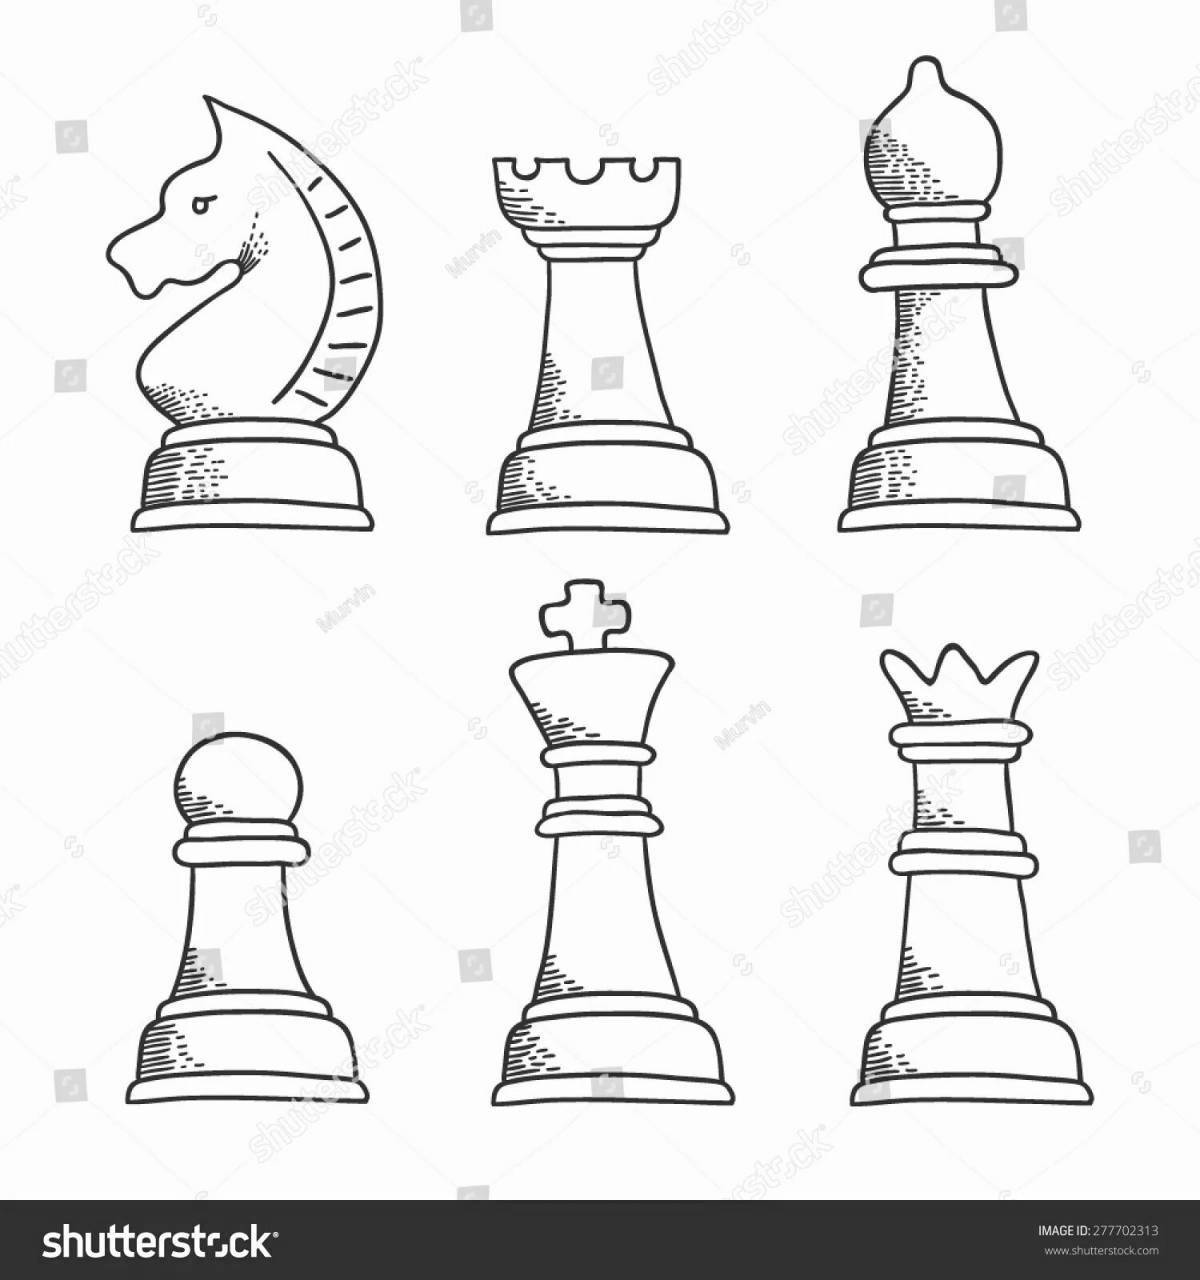 Coloring page amazing chess queen